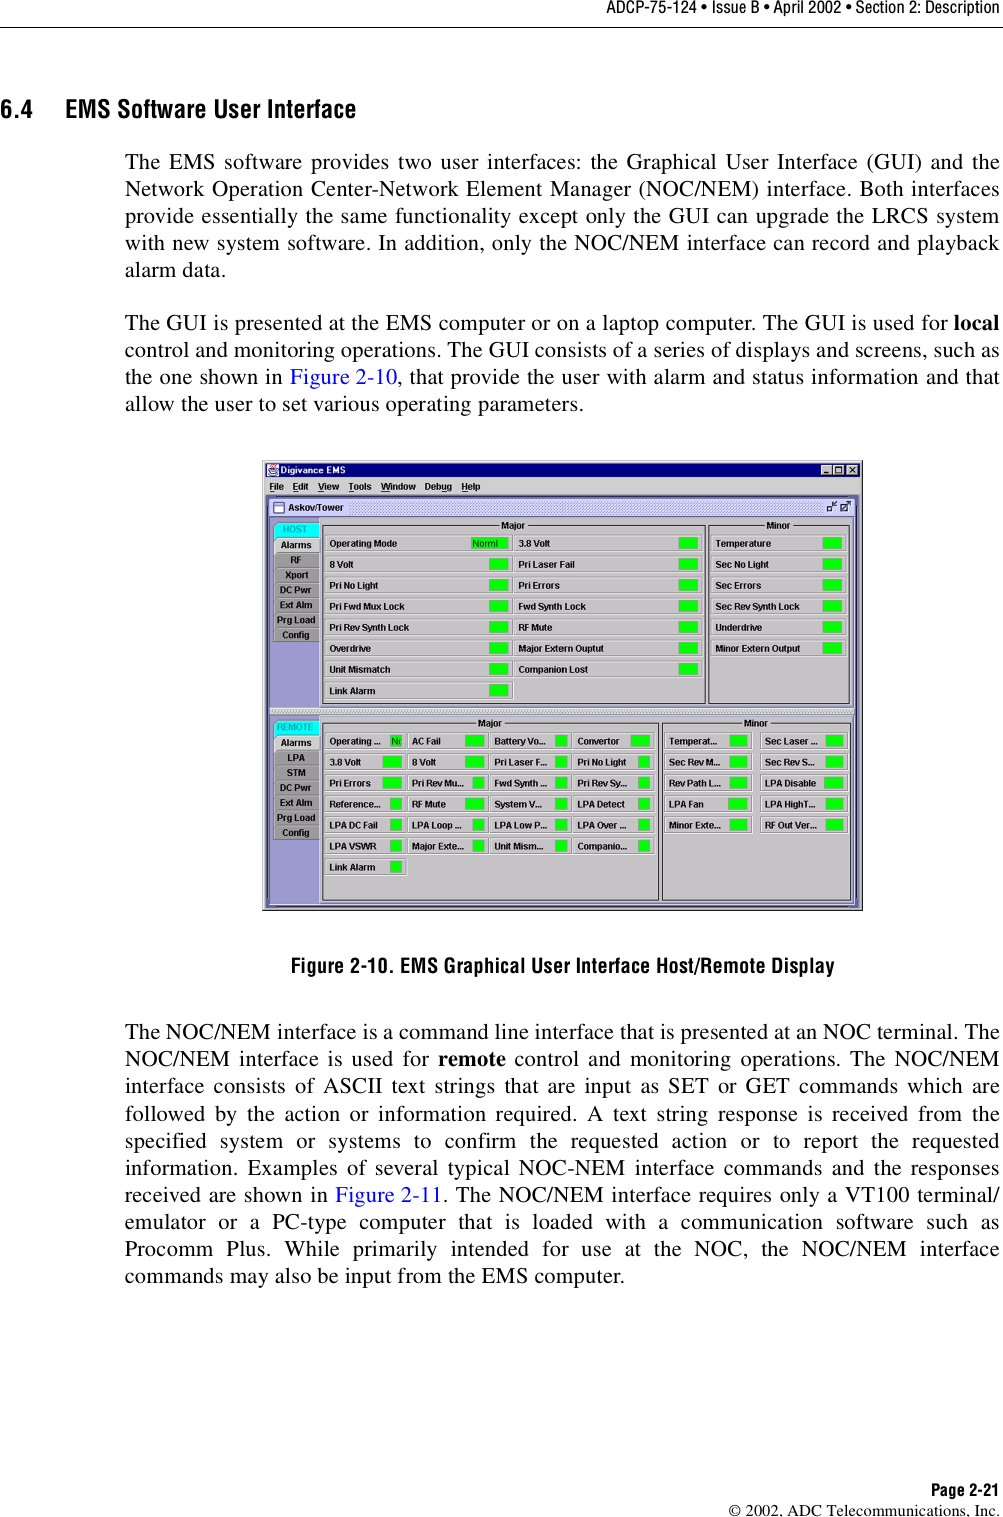 ADCP-75-124 • Issue B • April 2002 • Section 2: DescriptionPage 2-21©2002, ADC Telecommunications, Inc.6.4 EMS Software User InterfaceThe EMS software provides two user interfaces: the Graphical User Interface (GUI) and theNetwork Operation Center-Network Element Manager (NOC/NEM) interface. Both interfacesprovide essentially the same functionality except only the GUI can upgrade the LRCS systemwith new system software. In addition, only the NOC/NEM interface can record and playbackalarm data.The GUI is presented at the EMS computer or on alaptop computer. The GUI is used for localcontrol and monitoring operations. The GUI consists of aseries of displays and screens, such asthe one shown in Figure 2-10,that provide the user with alarm and status information and thatallow the user to set various operating parameters.Figure 2-10. EMS Graphical User Interface Host/Remote DisplayThe NOC/NEM interface is acommand line interface that is presented at an NOC terminal. TheNOC/NEM interface is used for remote control and monitoring operations. The NOC/NEMinterface consists of ASCII text strings that are input as SET or GET commands which arefollowed by the action or information required. Atext string response is received from thespecified system or systems to confirm the requested action or to report the requestedinformation. Examples of several typical NOC-NEM interface commands and the responsesreceived are shown in Figure 2-11.The NOC/NEM interface requires only aVT100 terminal/emulator or aPC-type computer that is loaded with acommunication software such asProcomm Plus. While primarily intended for use at the NOC, the NOC/NEM interfacecommands may also be input from the EMS computer.